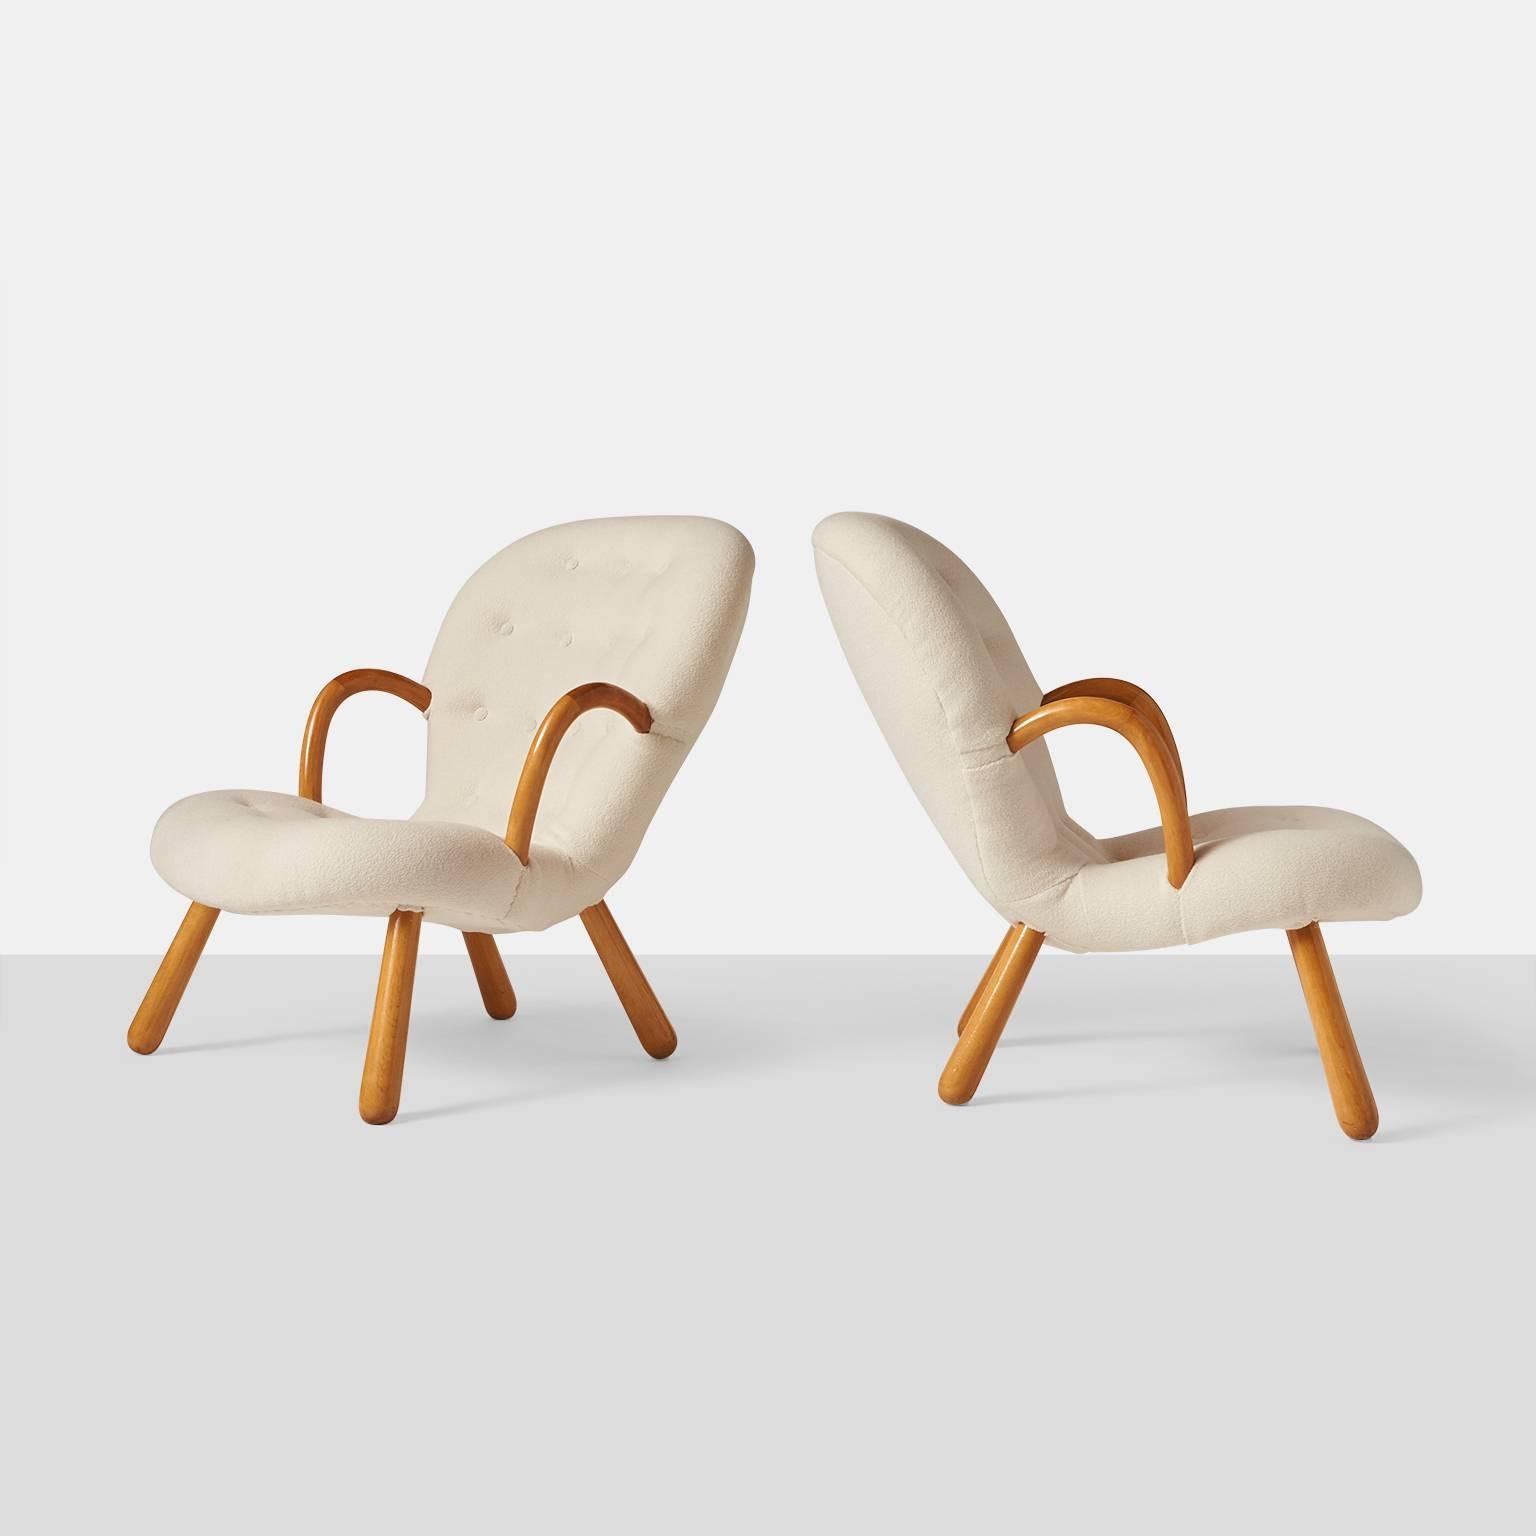 A pair of lounge chairs by Philip Arctander for Nordisk Staal-Mobel, Denmark, circa 1944. The chairs have been restored using a luxuriously soft wool bouclé fabric from Holland & Sherry.

  